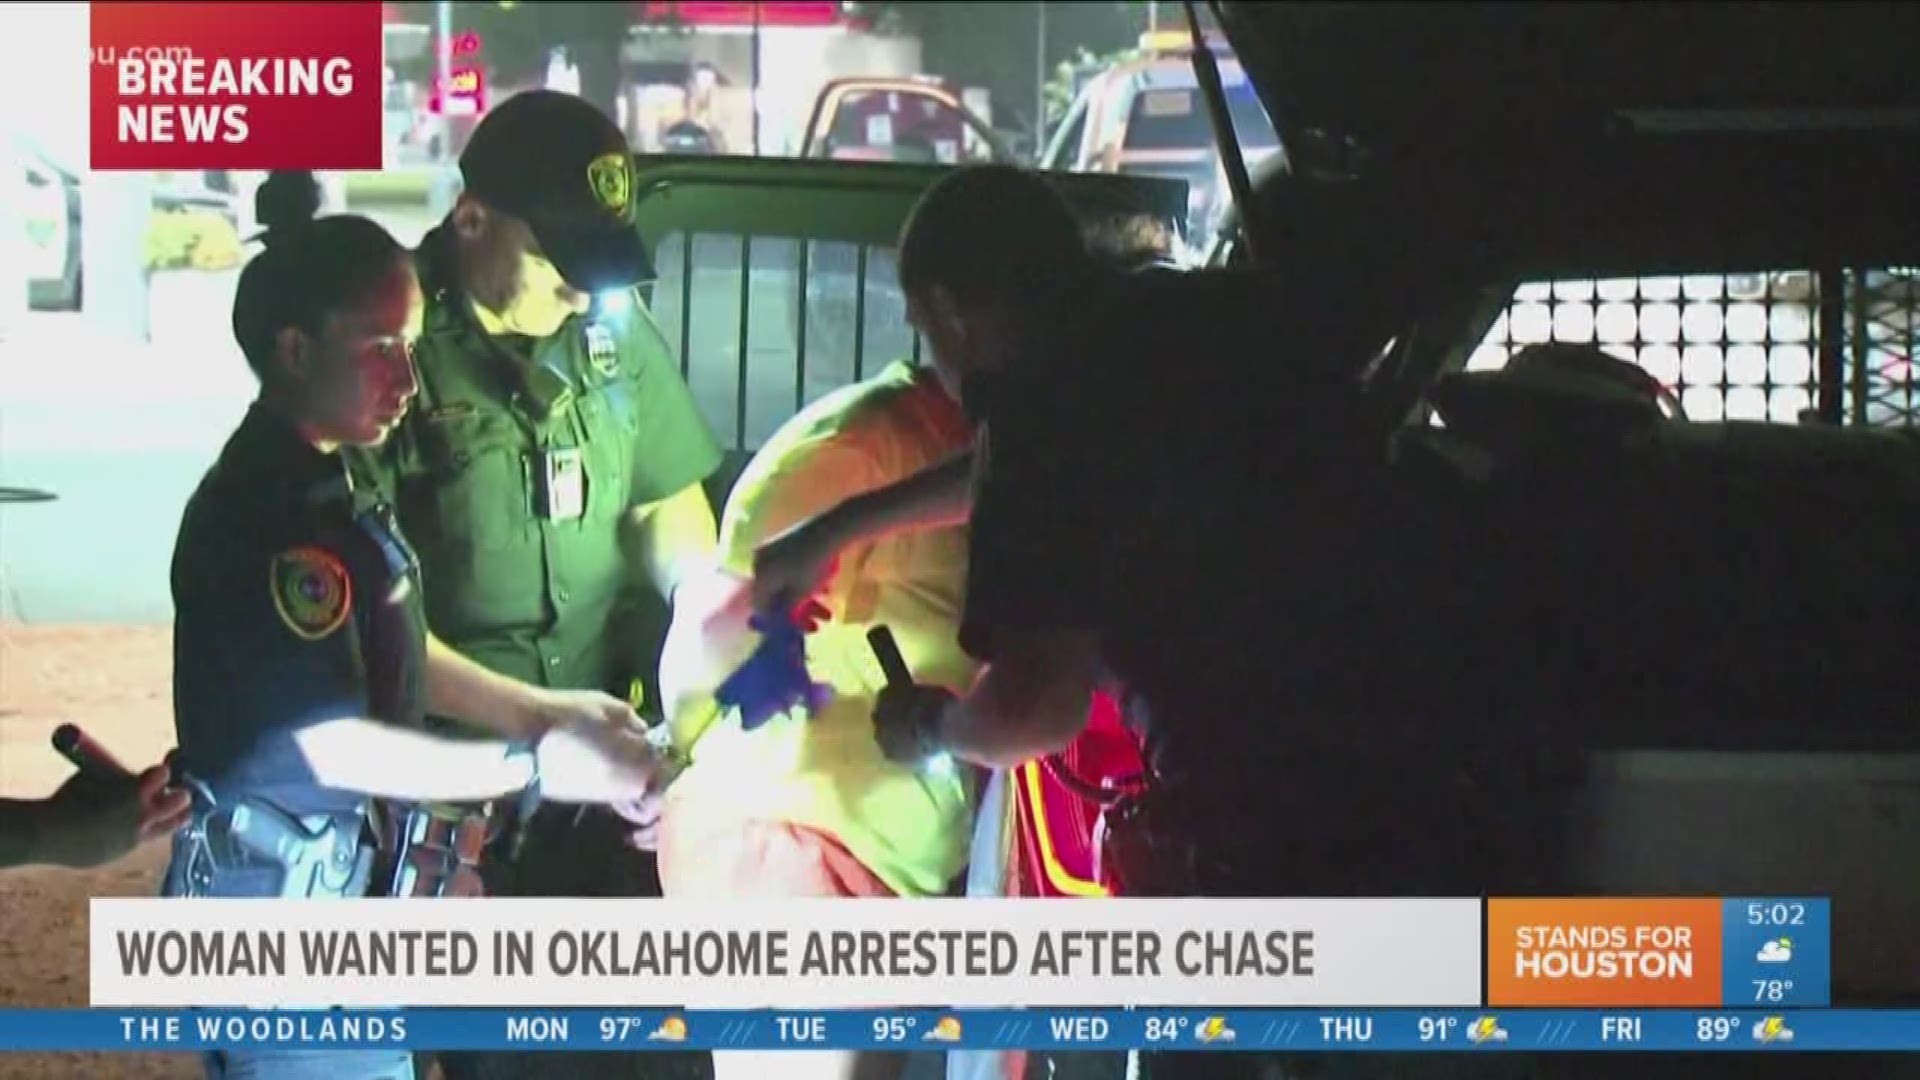 A woman and a man led police on wild chase overnight, which including them tossing out drugs and counterfeit cash out of the car windows along the way.